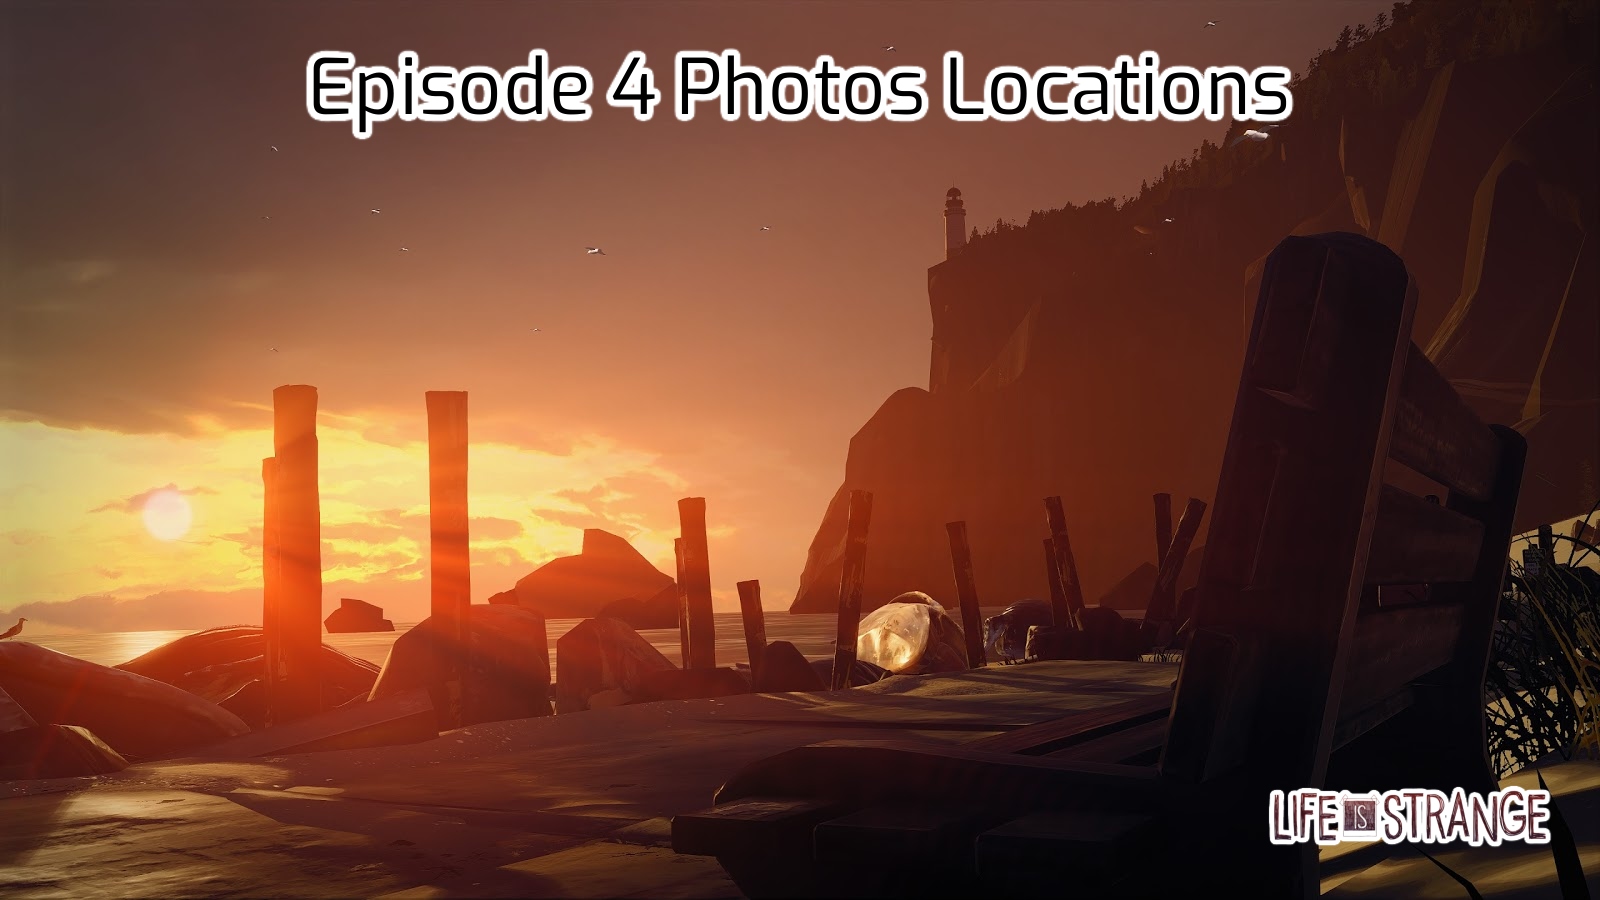 You are currently viewing Life Is Strange Episode 4 Photos Locations